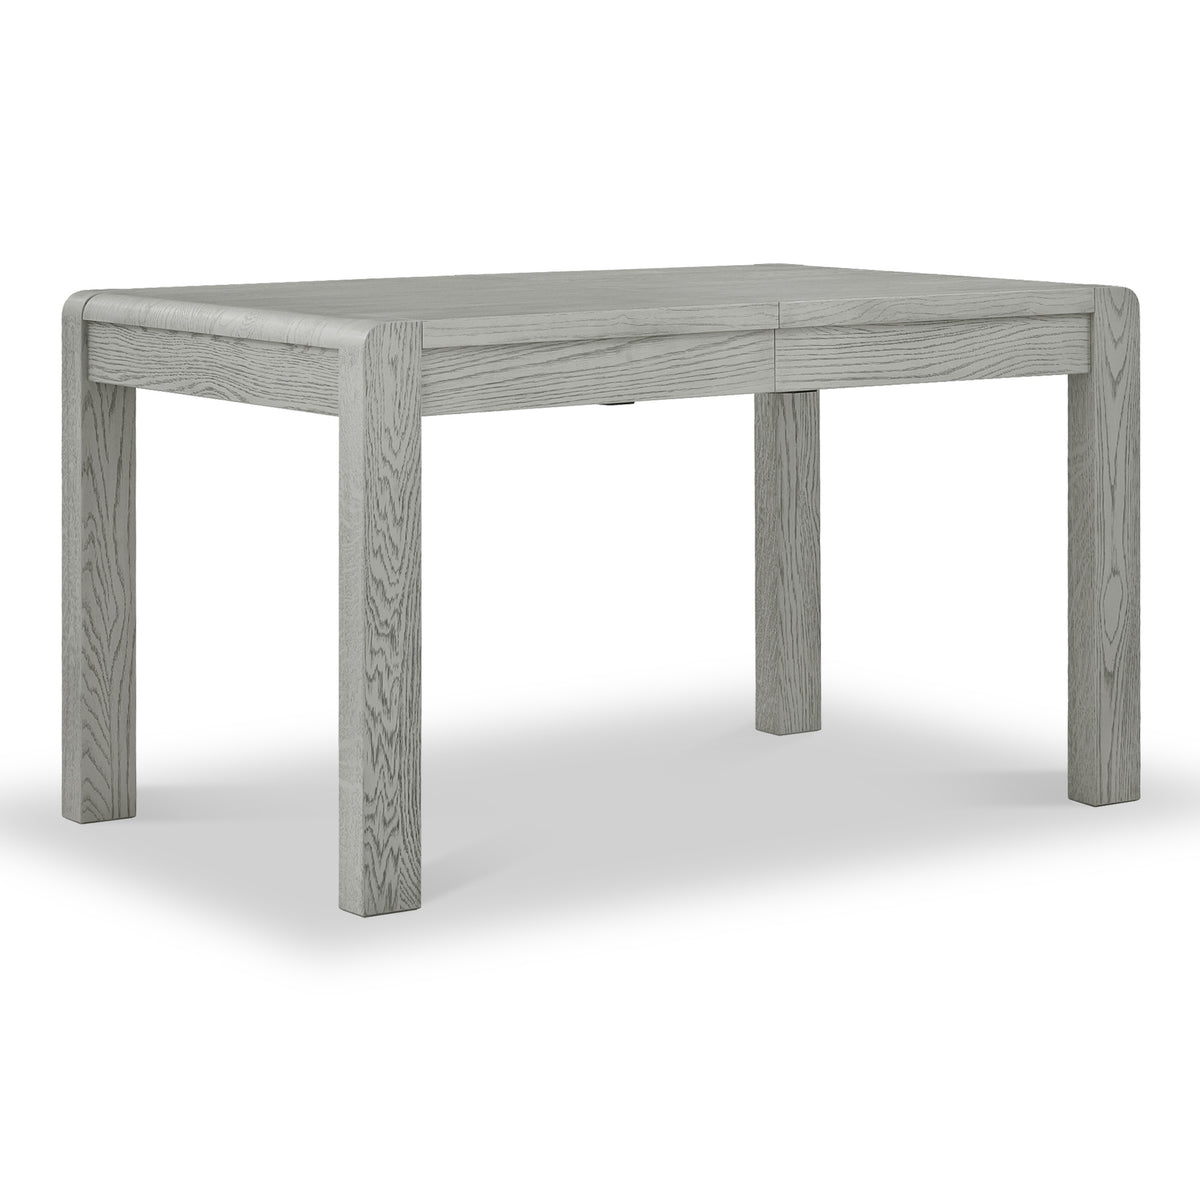 Cardona Grey Compact Extending Dining Table from Roseland Furniture